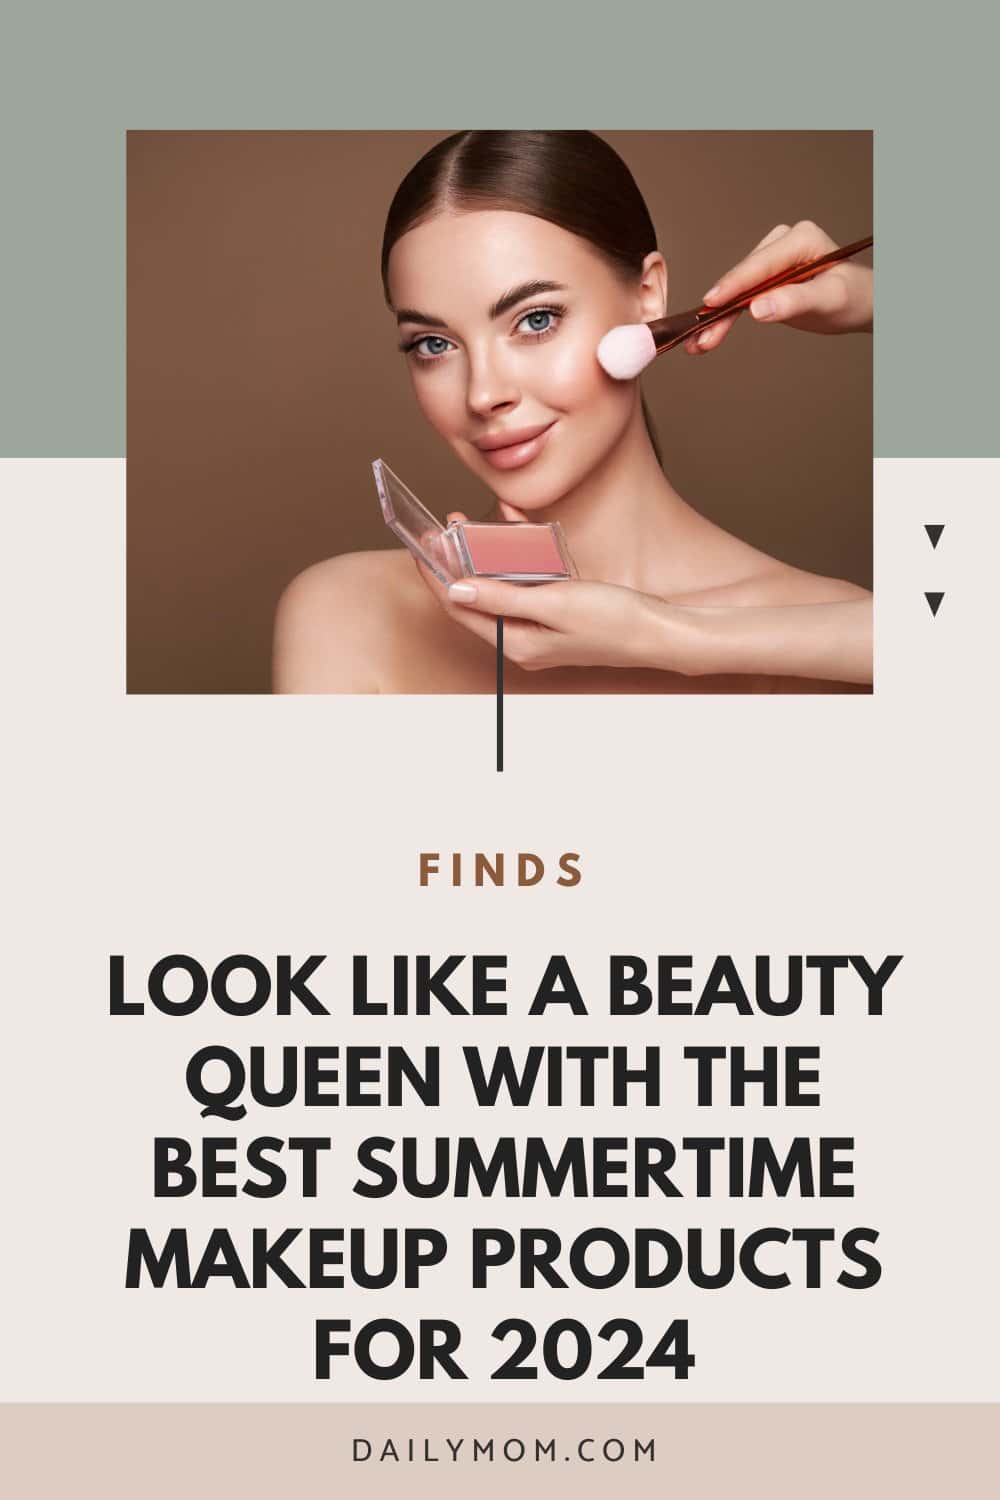 Look Like A Beauty Queen With The Best Summertime Makeup Products For 2024 22 Daily Mom, Magazine For Families